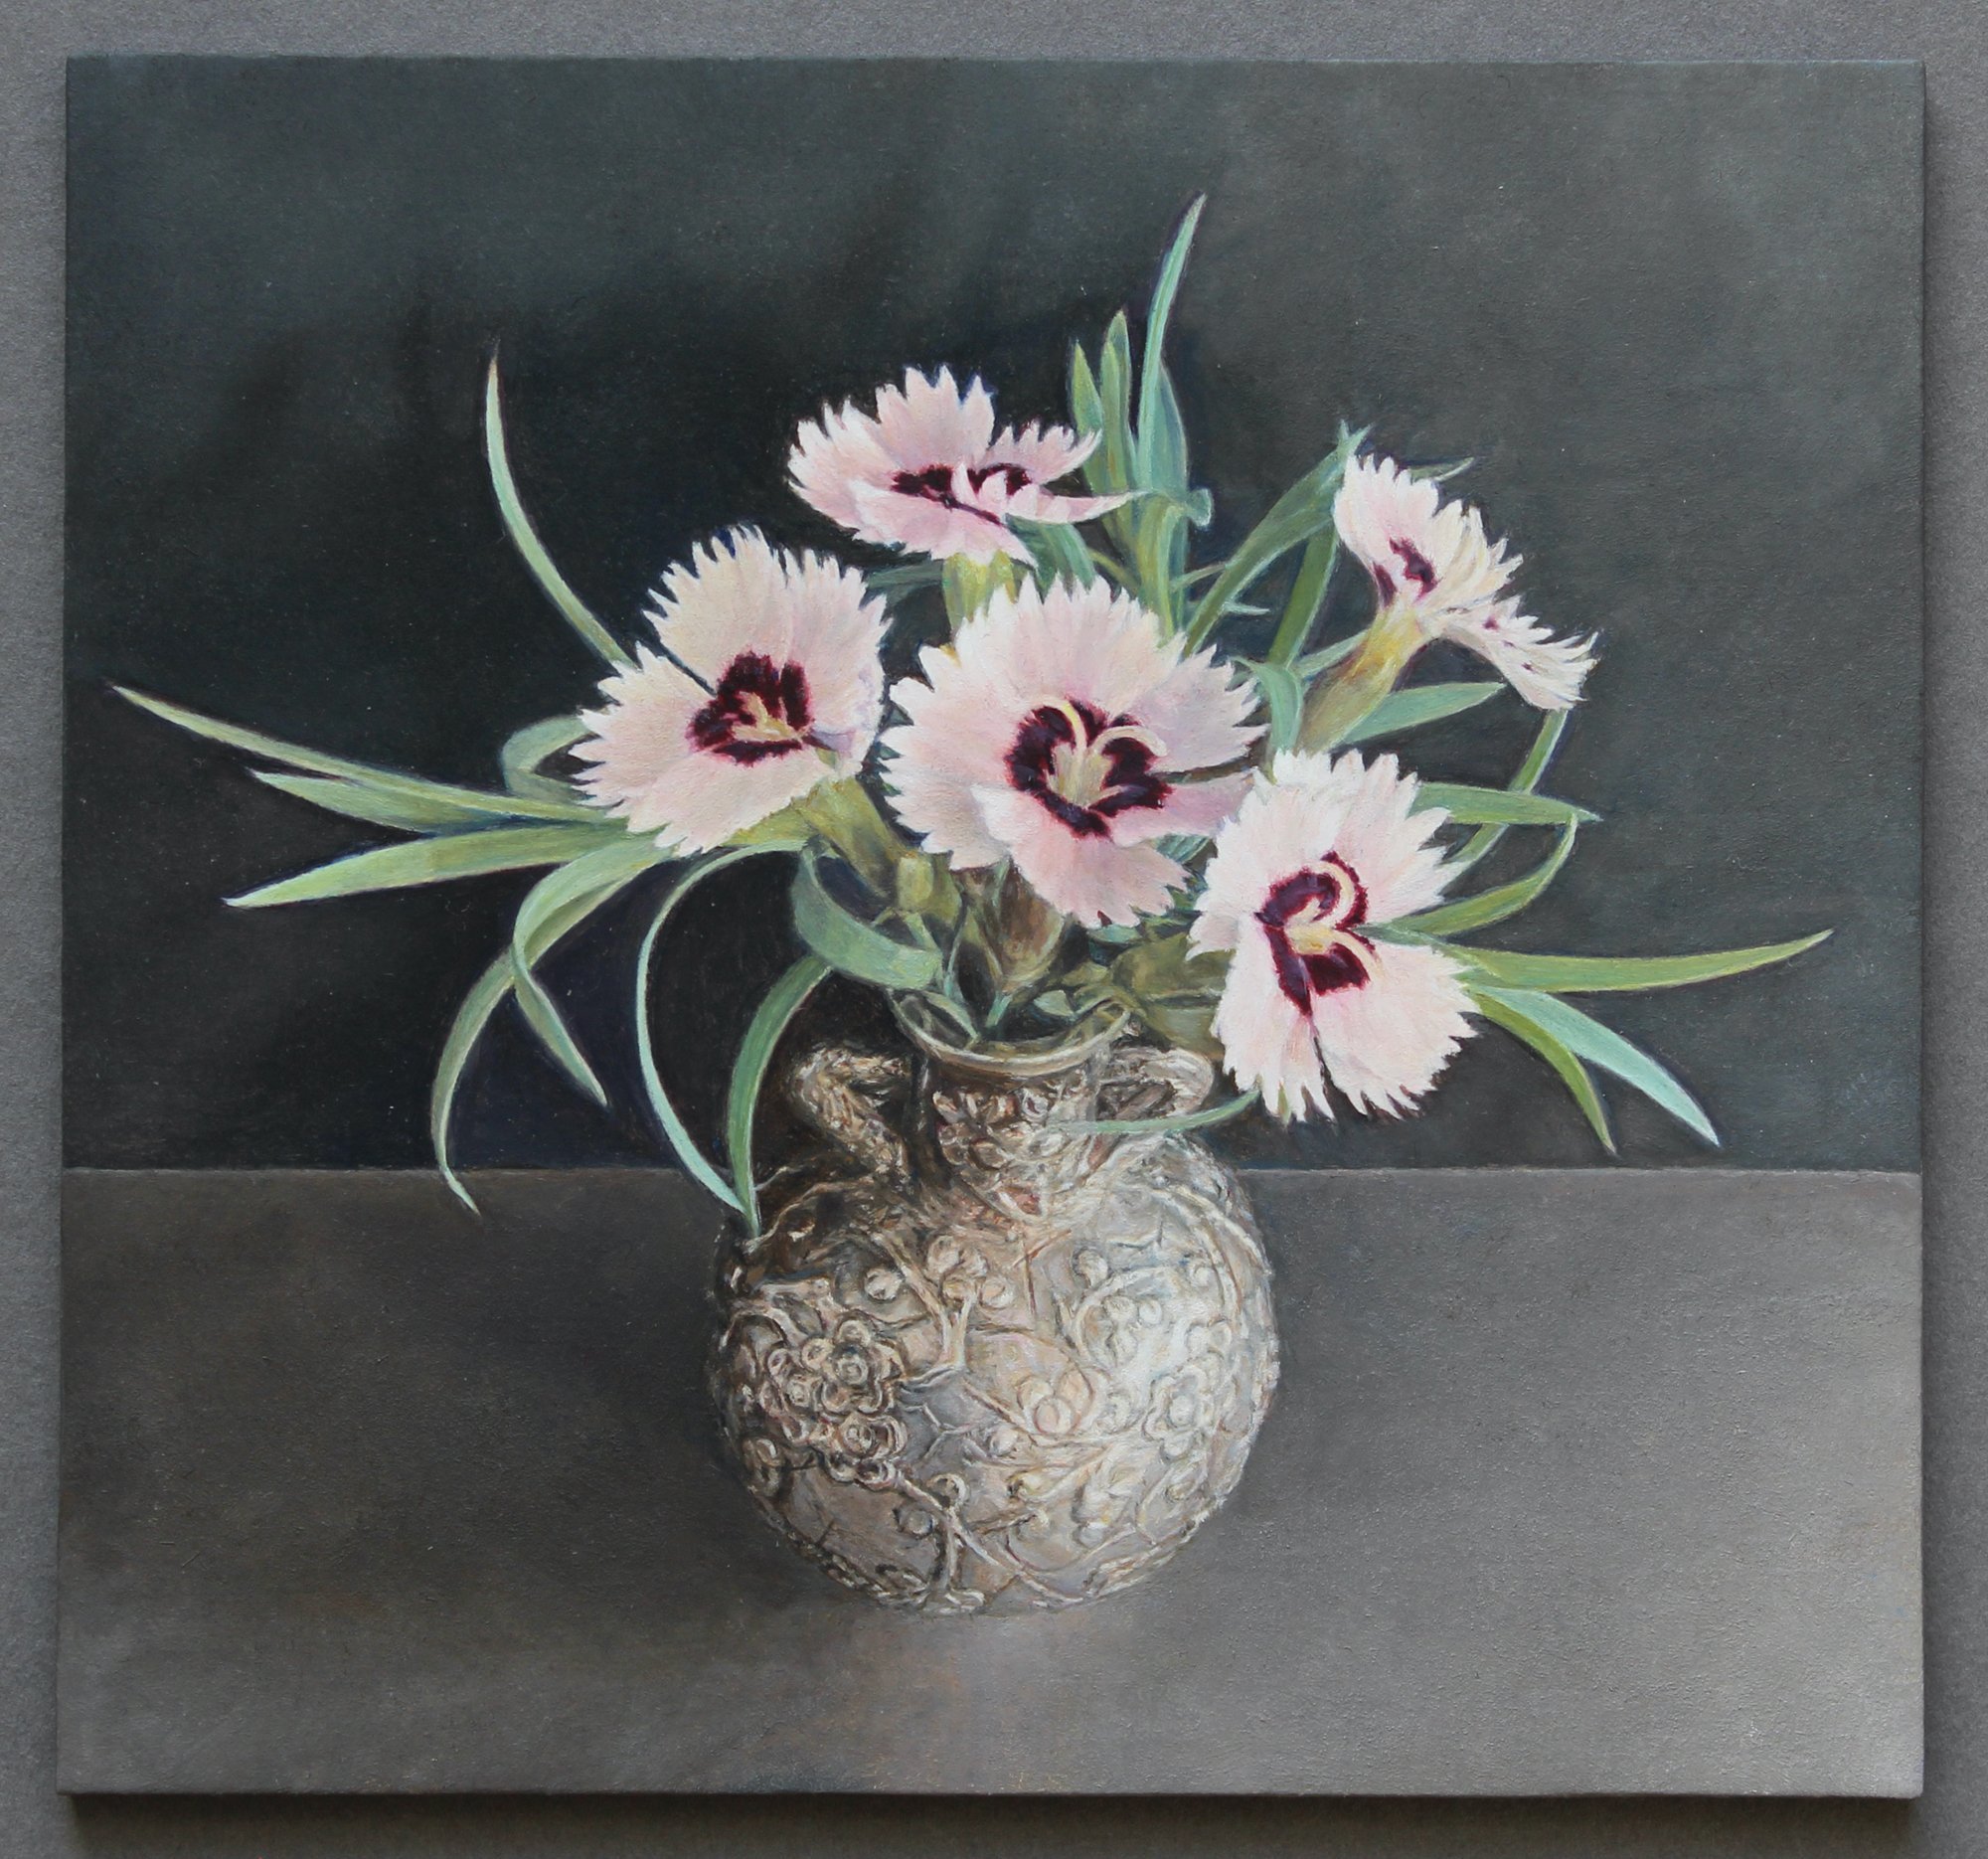 Pinks, 2022, oil on board, 4 1/2 x 4 1/2 inches